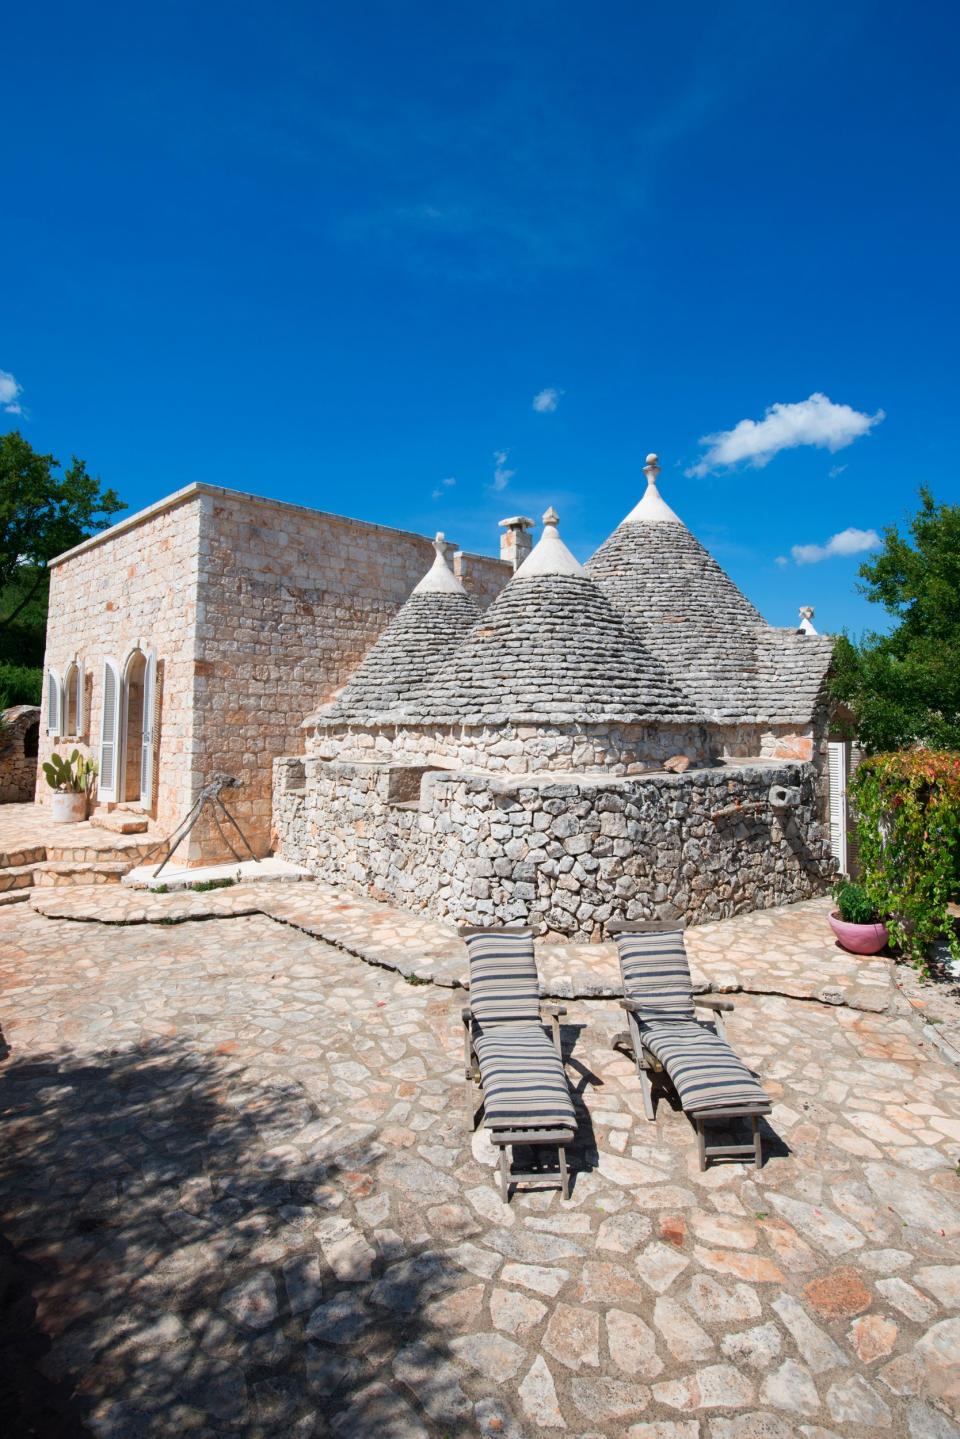 Why Etro loves his trulli: “Ancient building, ancient culture, stay connected,” he says. “And not to the internet.”